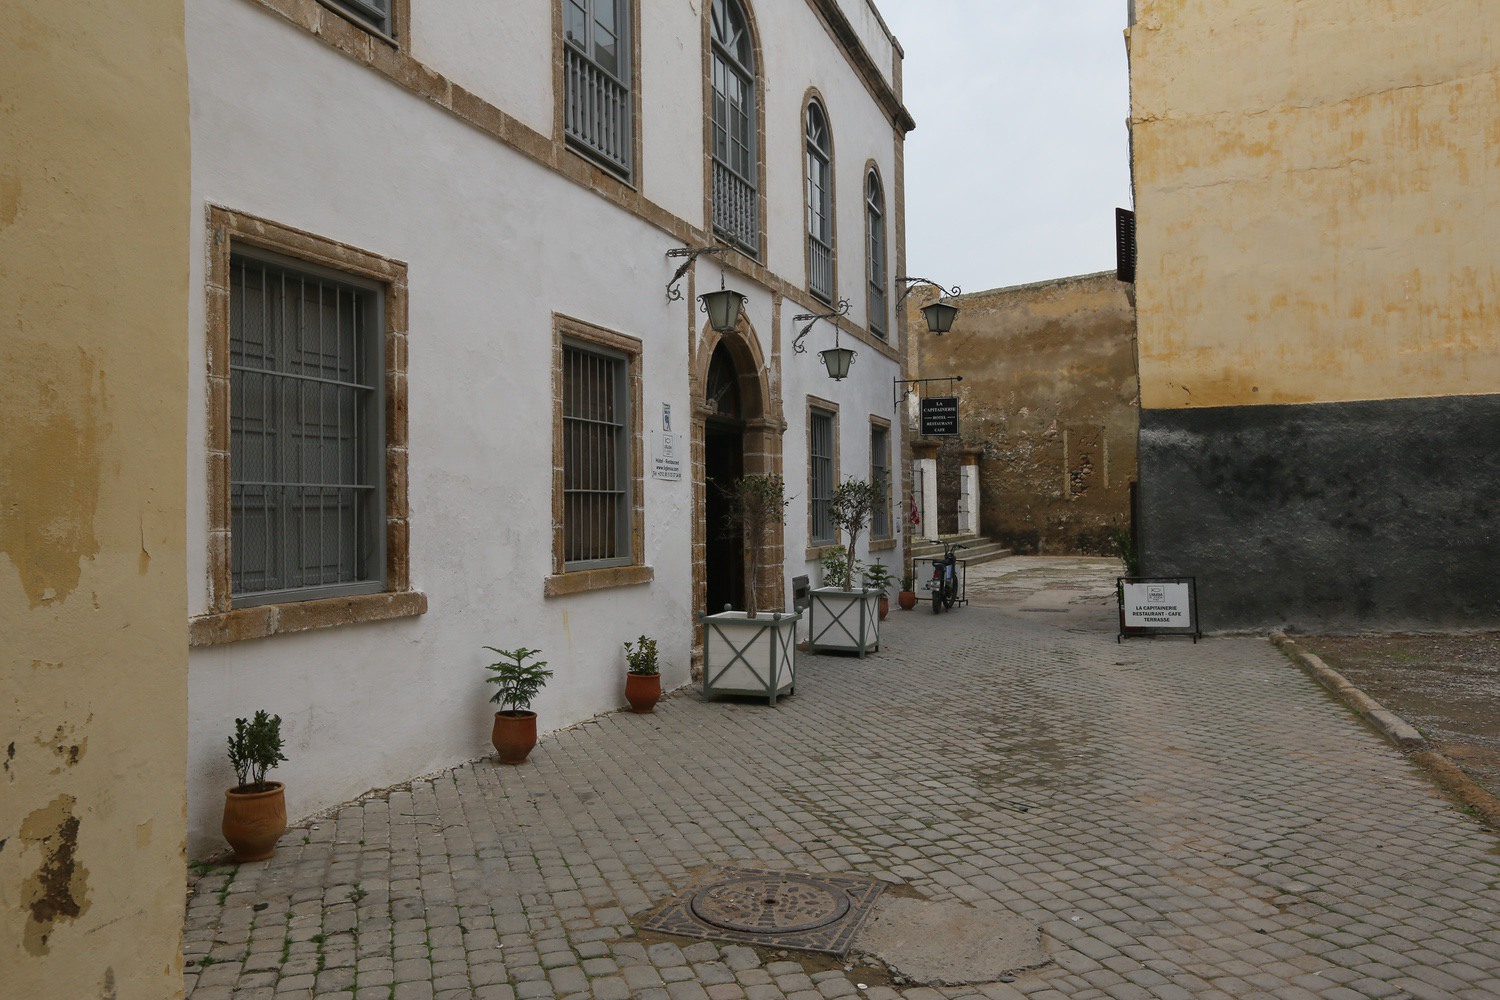 Cidade portuguesa - View of a street in the old city